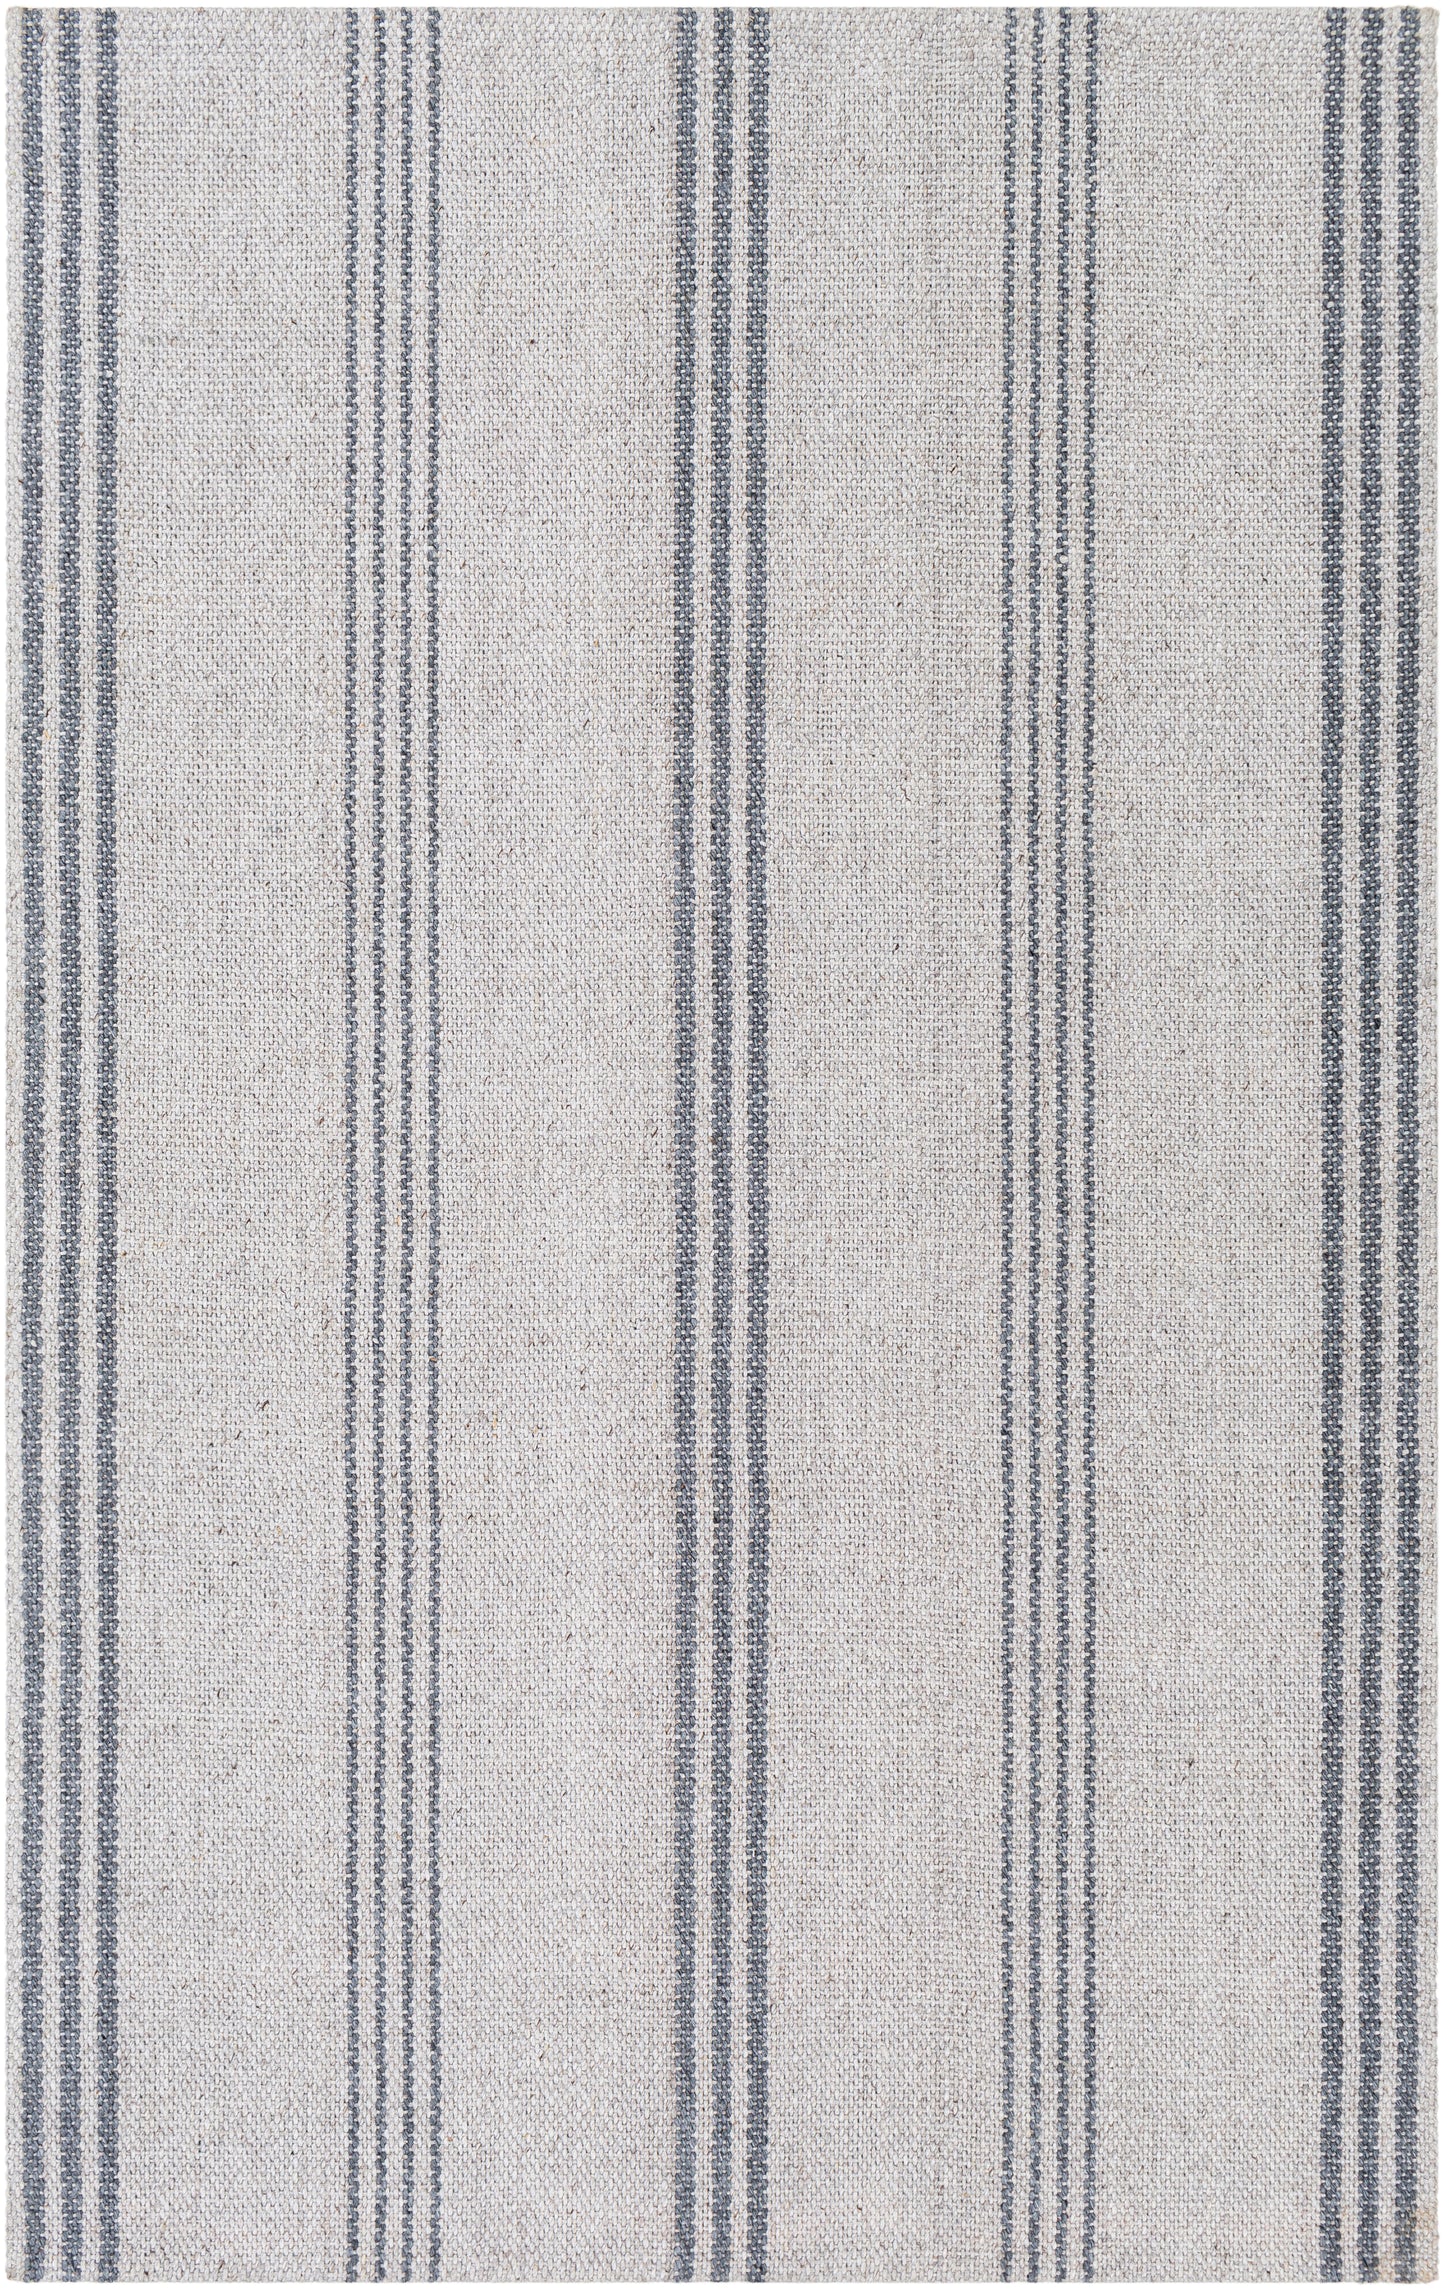 Tartan 27253 Hand Woven Synthetic Blend Indoor Area Rug by Surya Rugs